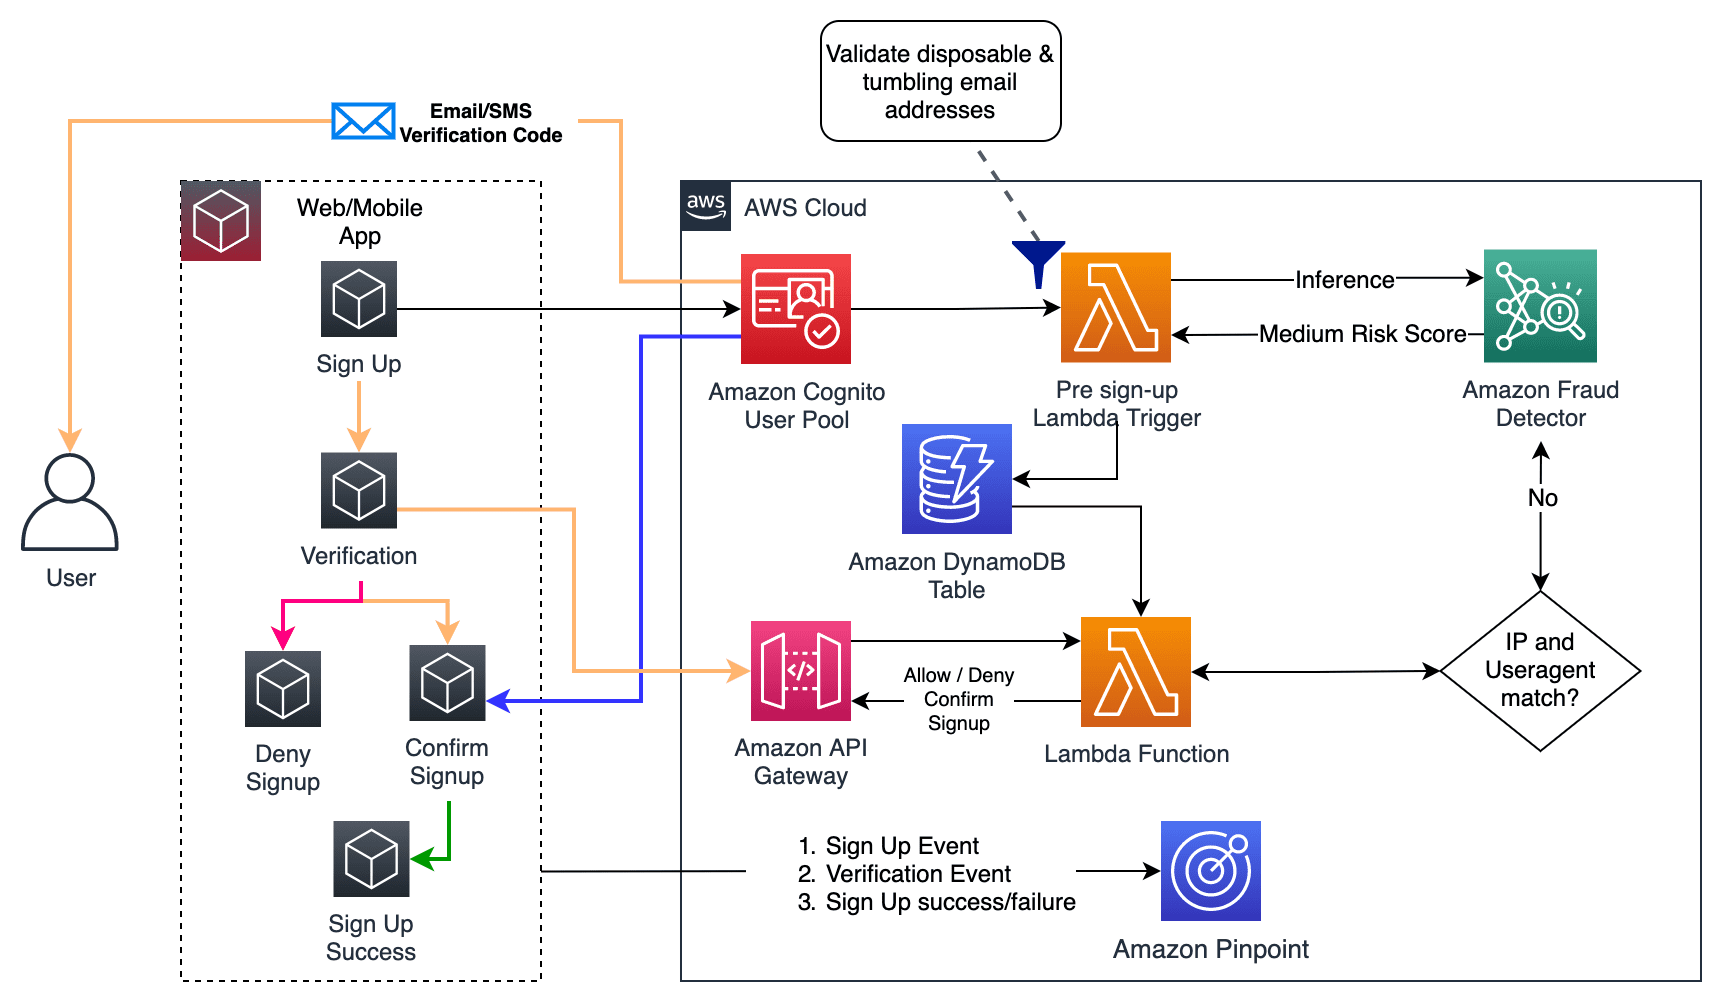 Registration flow architecture when medium fraud risk outcome Is detected by Amazon Fraud Detector using Amazon Cognito pre sign-up AWS Lambda function, Amazon API Gateway, AWS Lambda, and Amazon DynamoDB